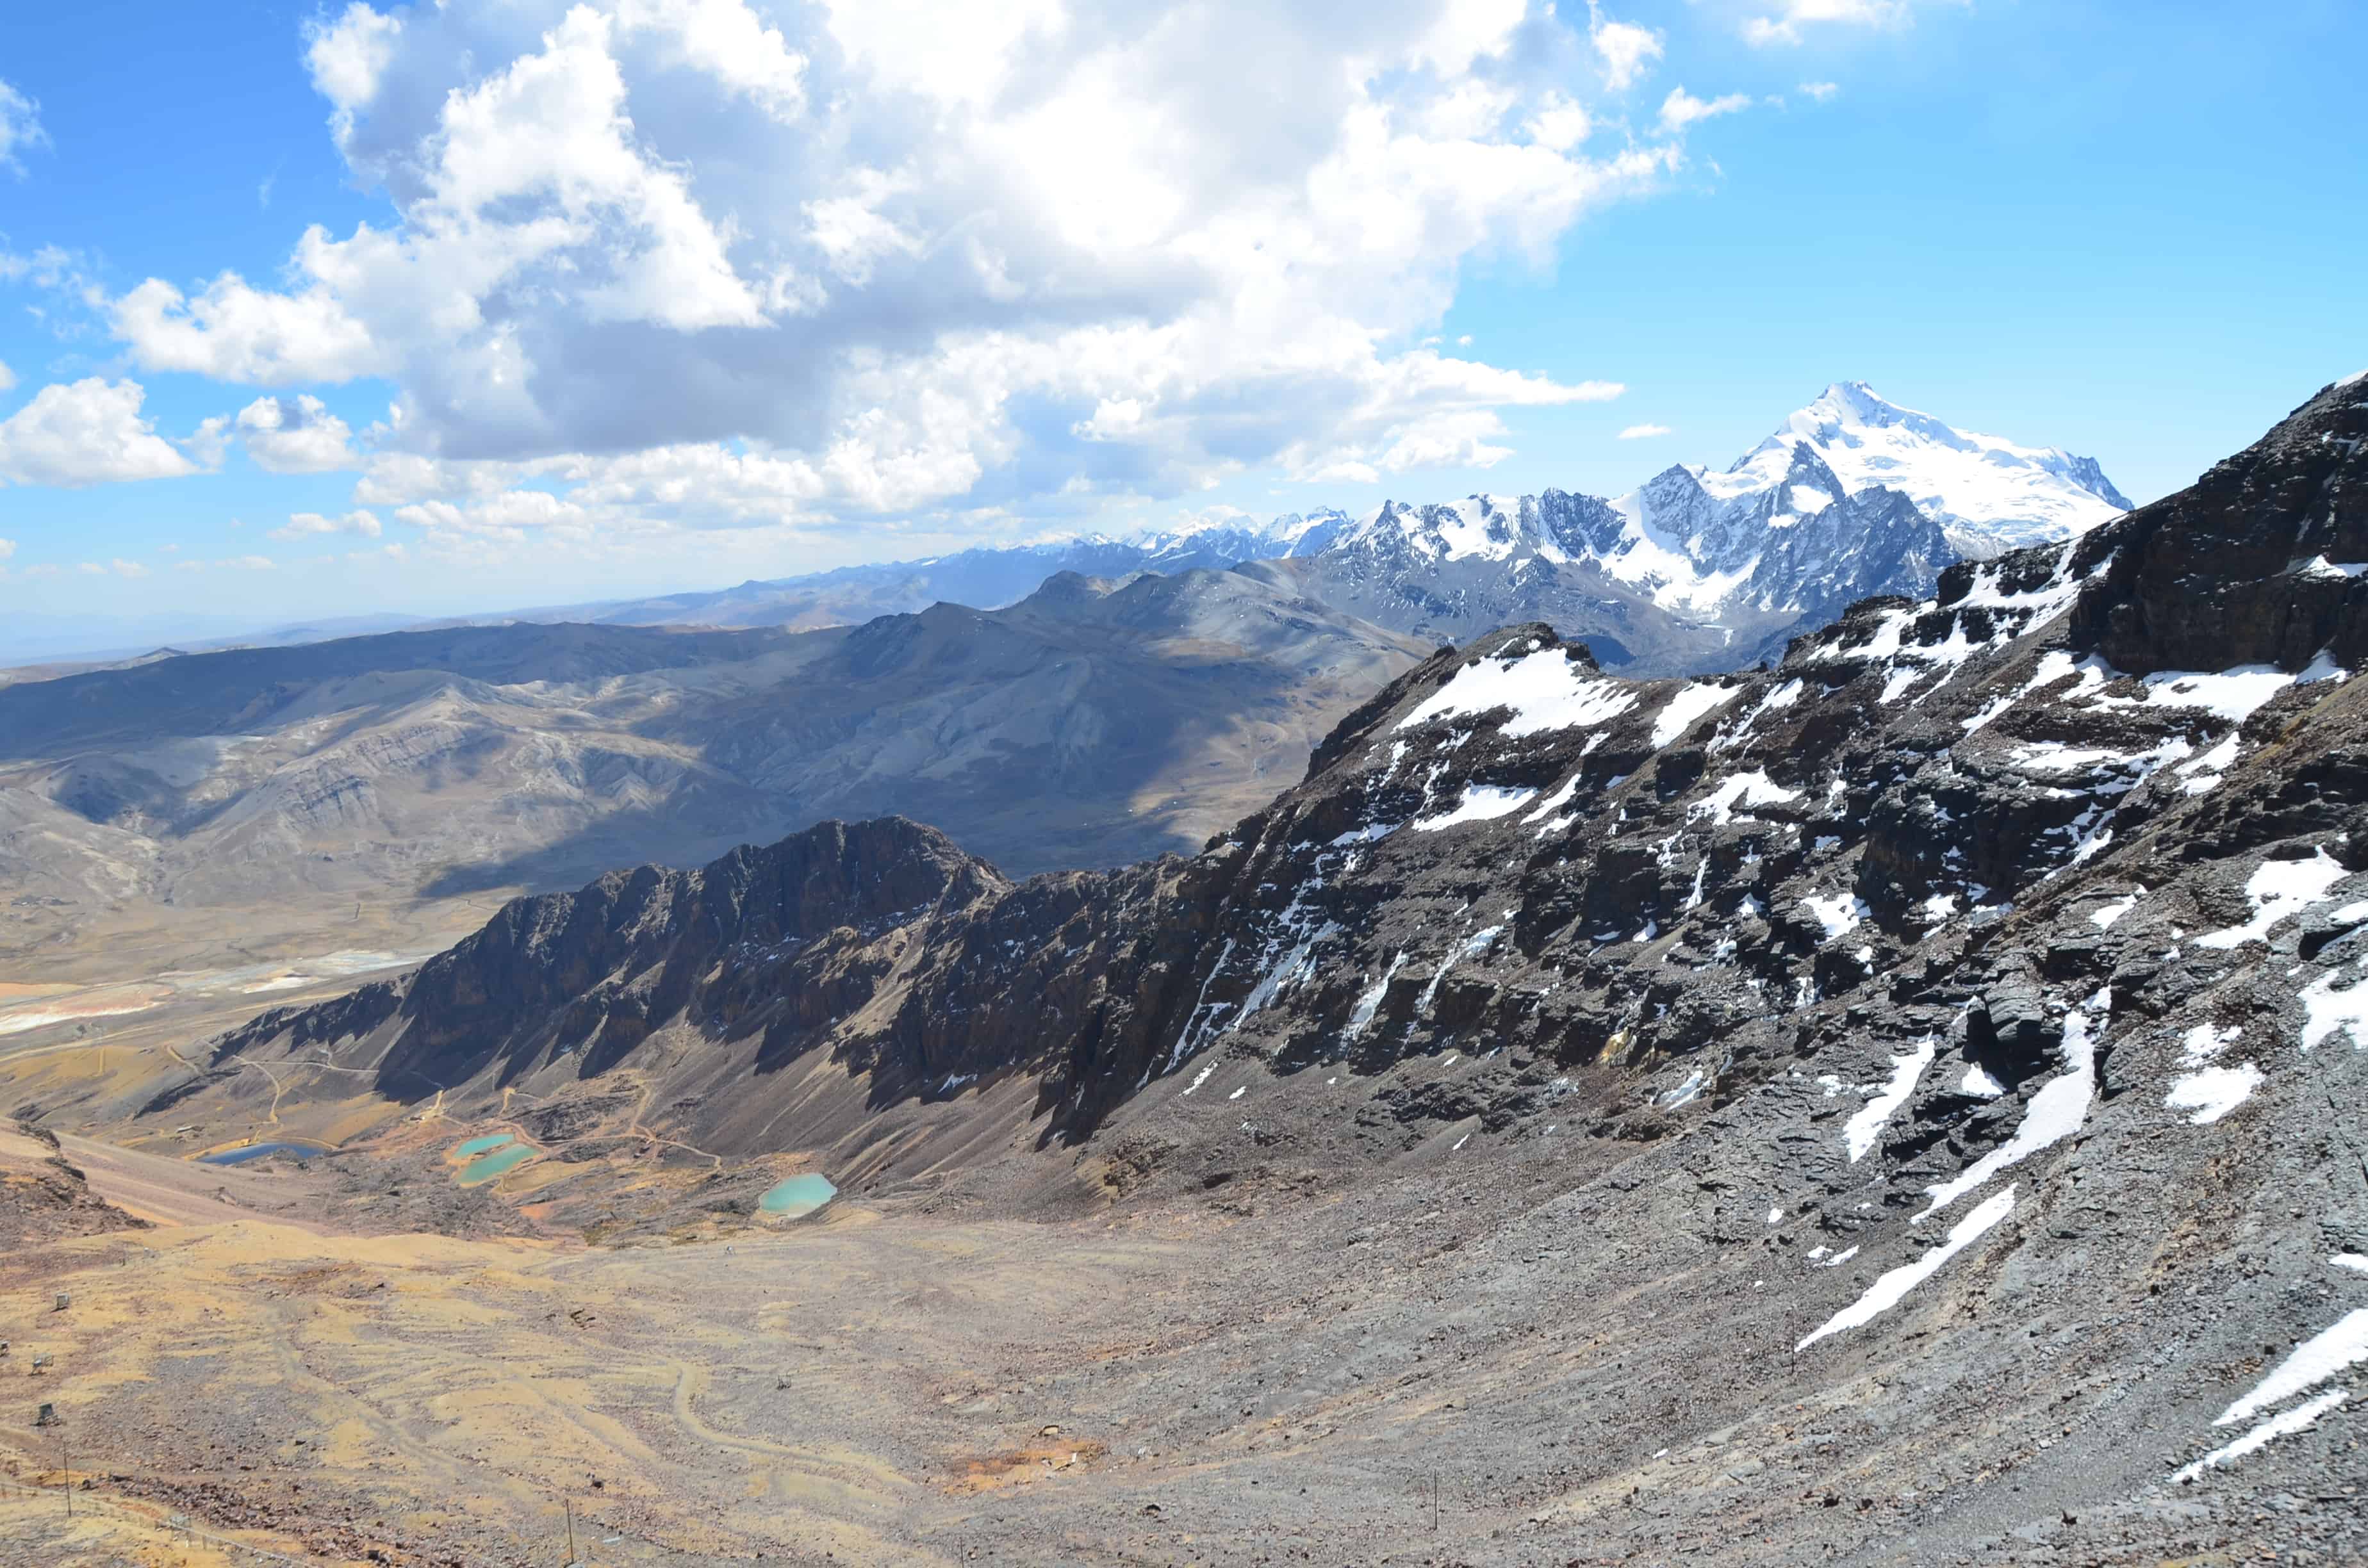 The view from the top of Chacaltaya, Bolivia